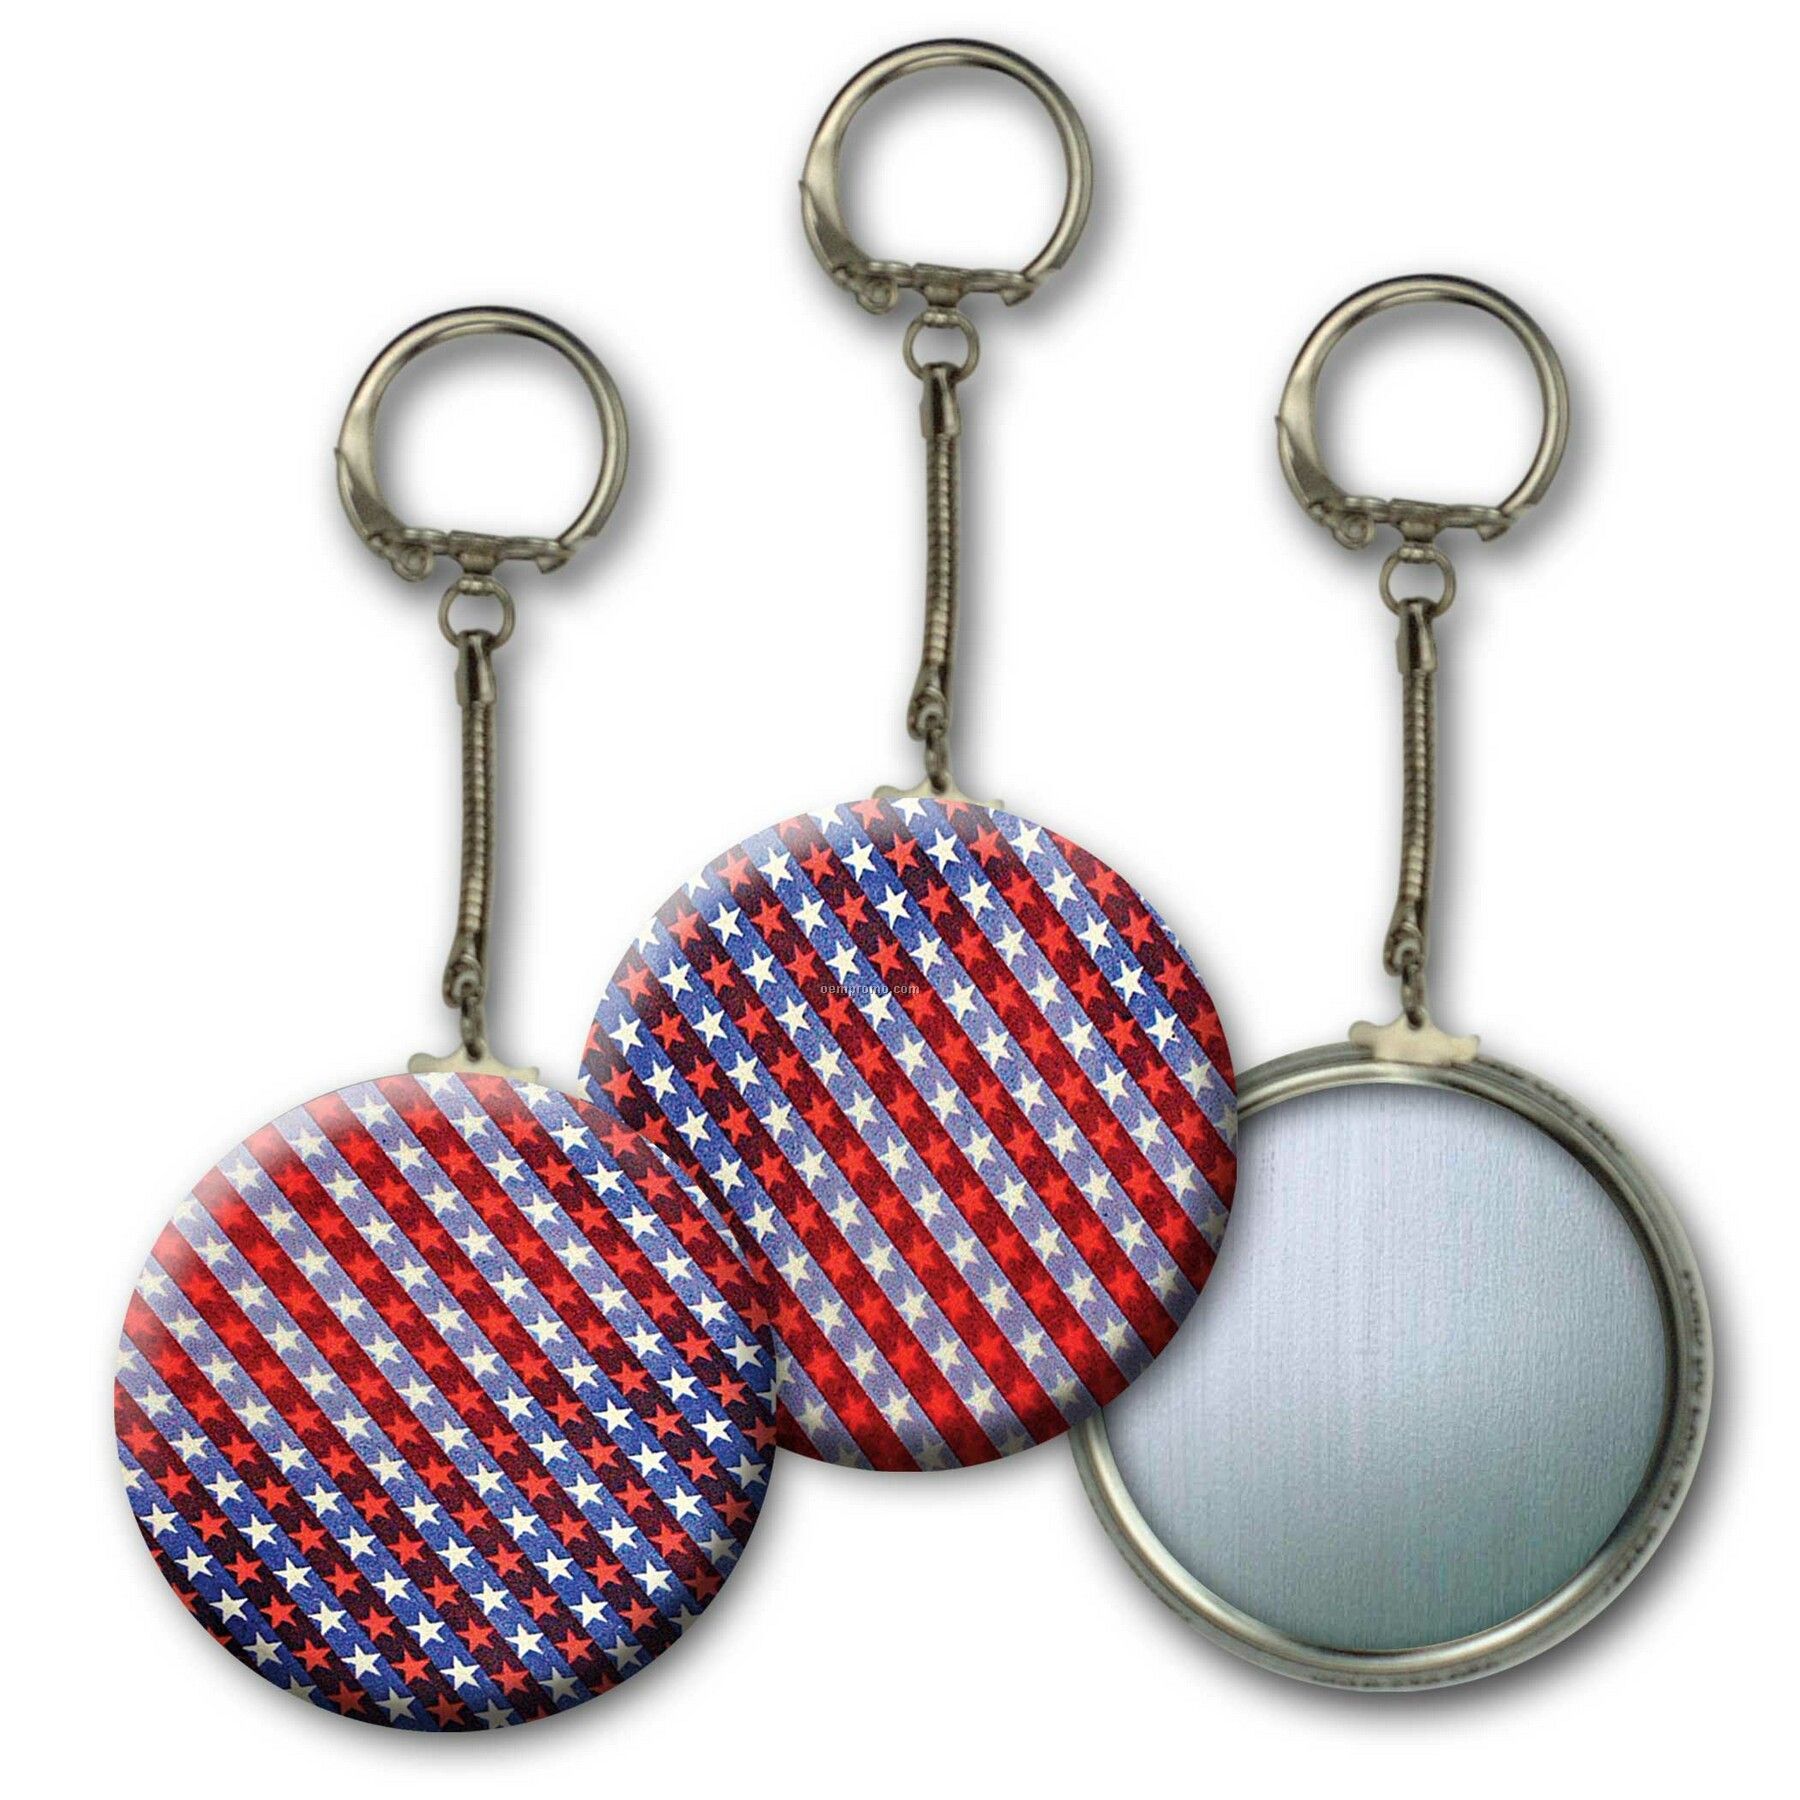 Metallic Key Chain W/3d Lenticular Animated Stars And Stripes (Blanks)